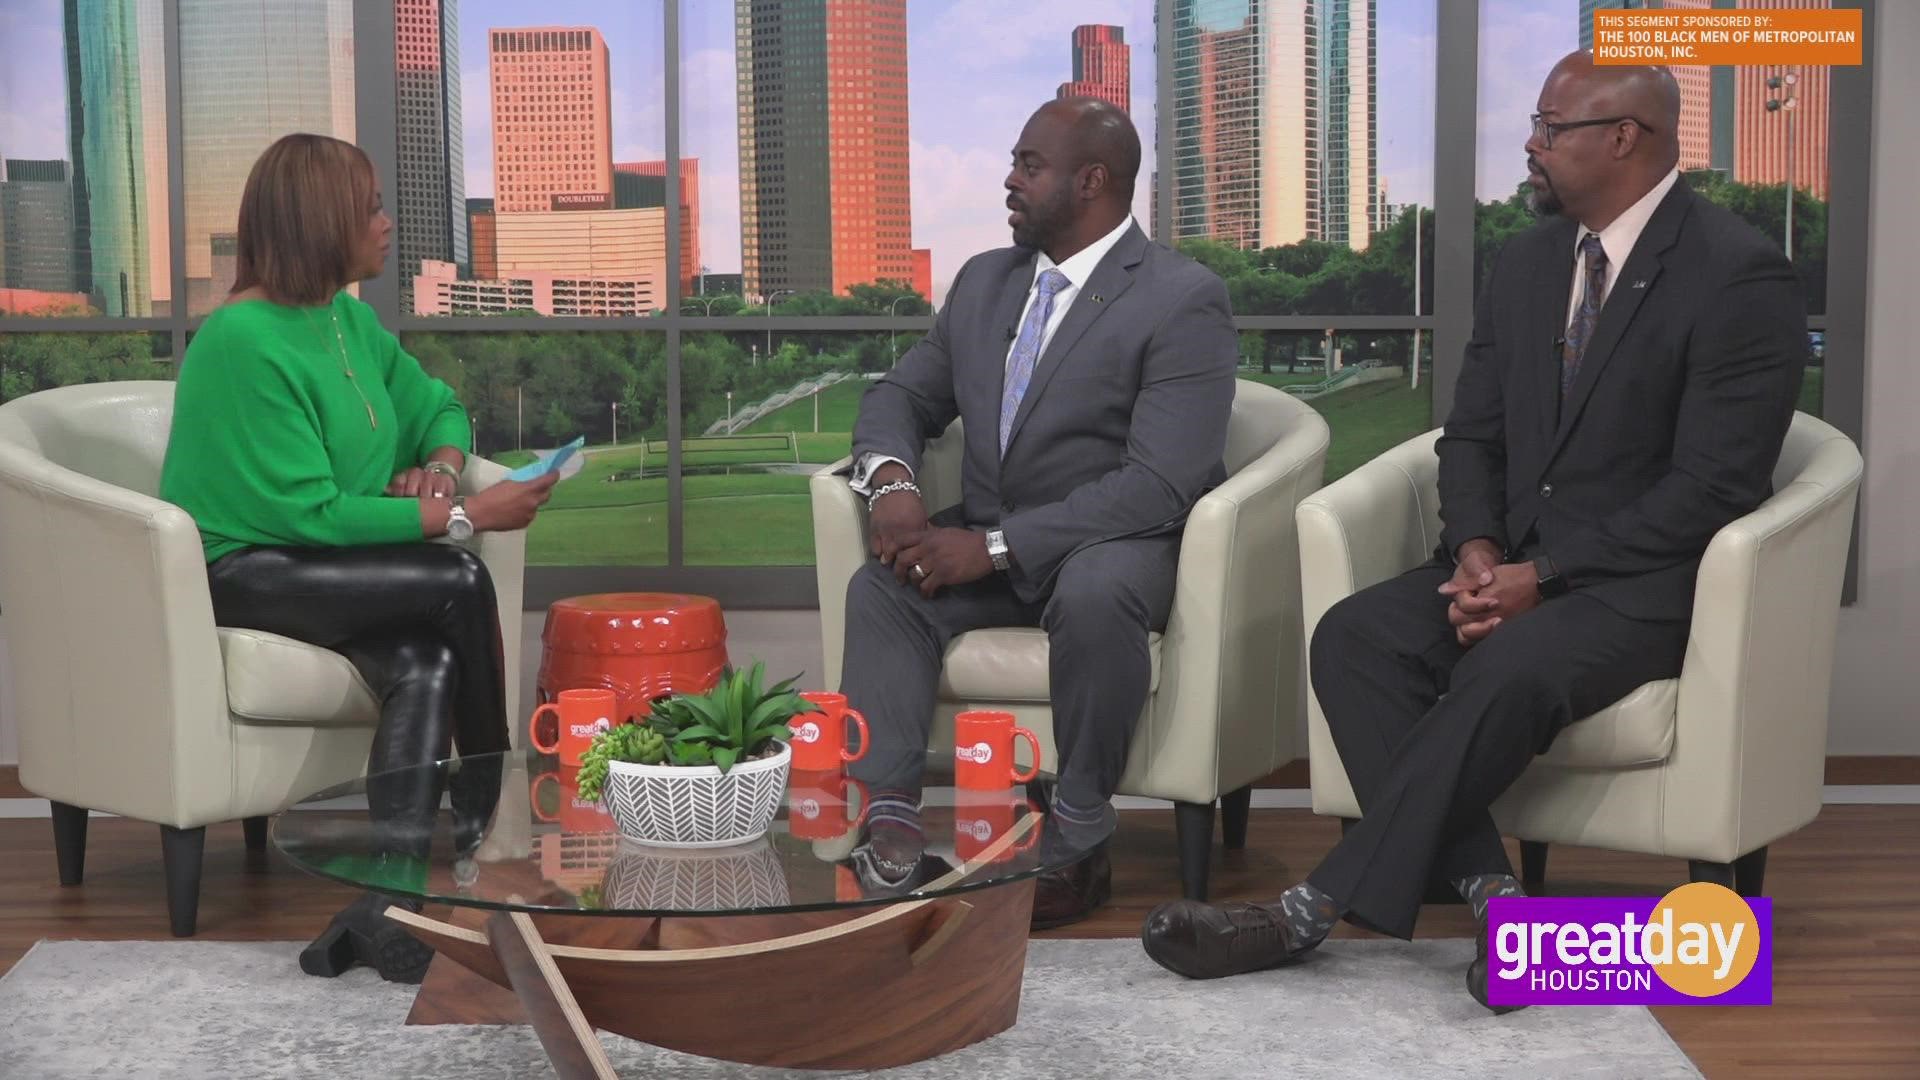 Members of The 100 Black Men of Metropolitan Houston joined Great Day to share their history, mission and education conference happening this weekend.